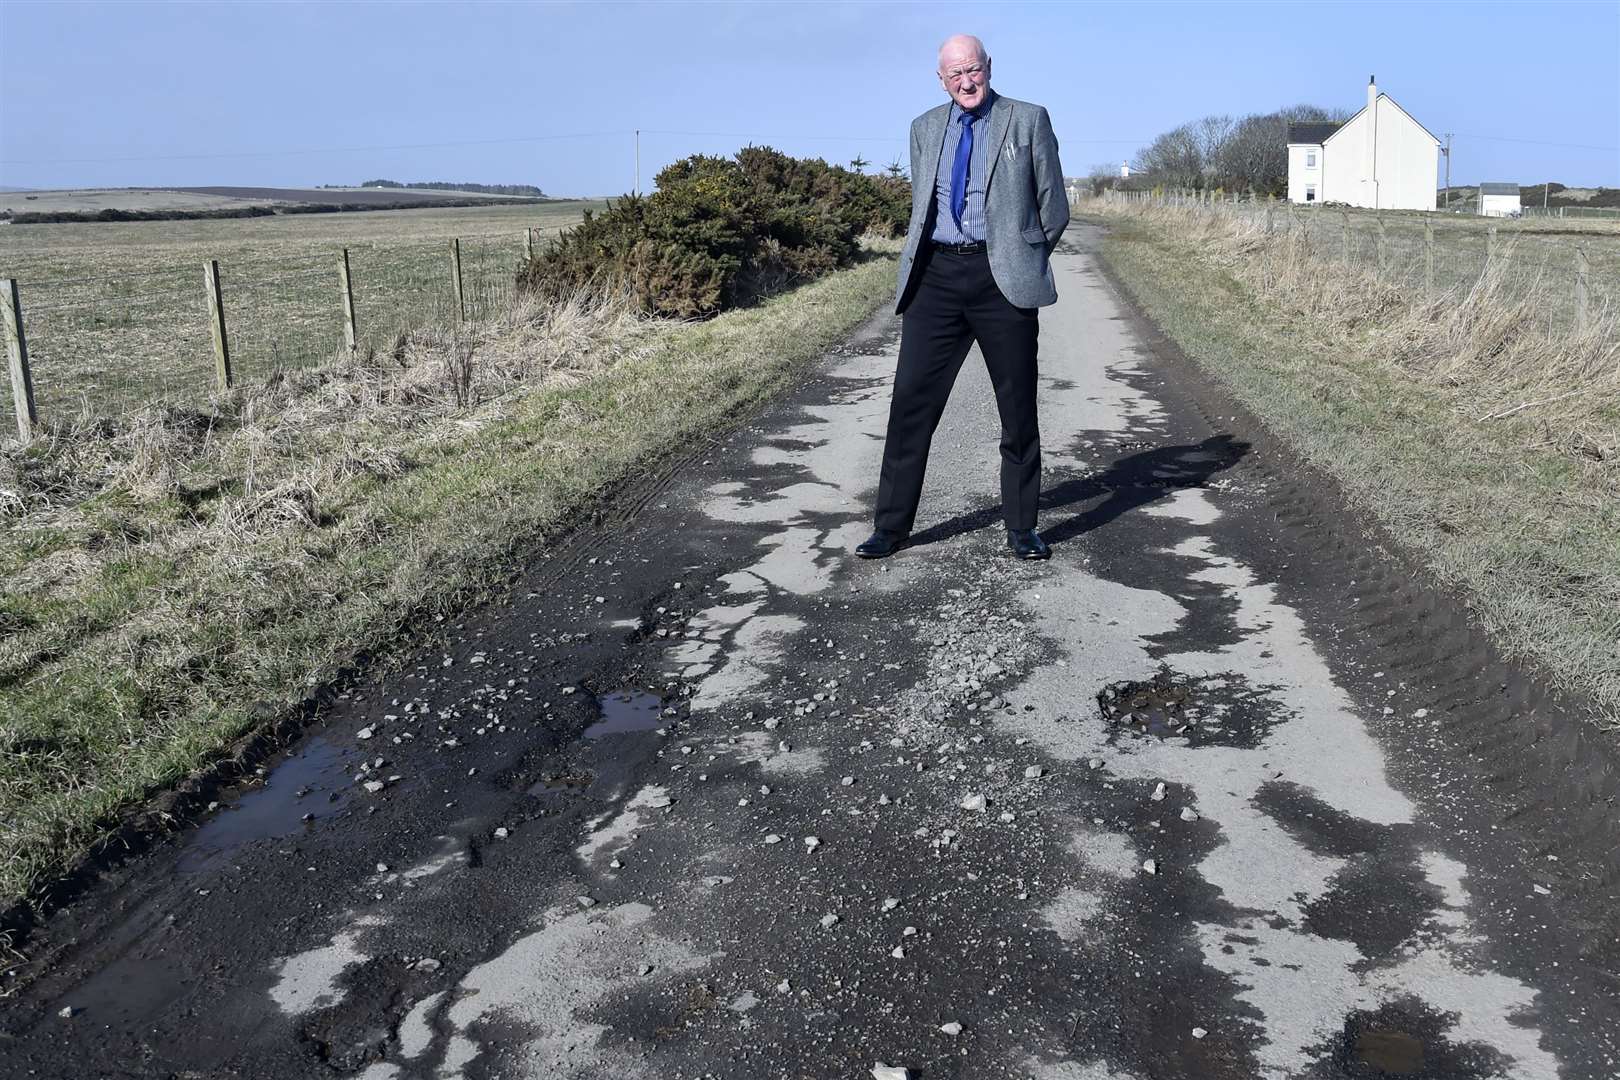 Iain Gregory views potholes at Tain, near Castletown. His campaign group, Caithness Roads Recovery, pledges its total support for the disabled panel.